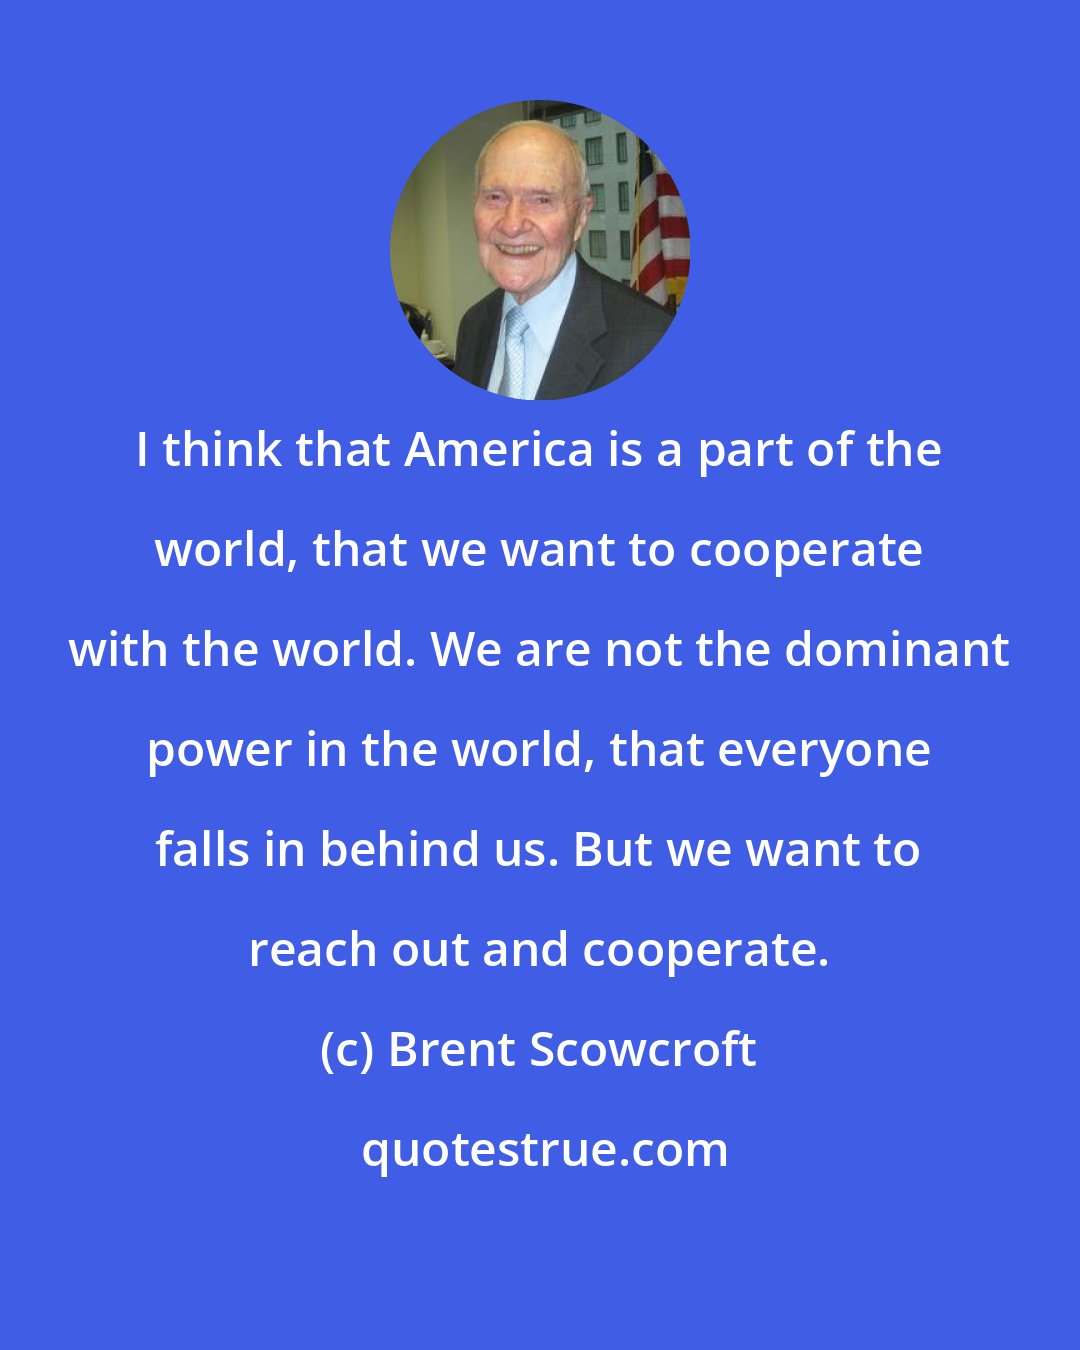 Brent Scowcroft: I think that America is a part of the world, that we want to cooperate with the world. We are not the dominant power in the world, that everyone falls in behind us. But we want to reach out and cooperate.